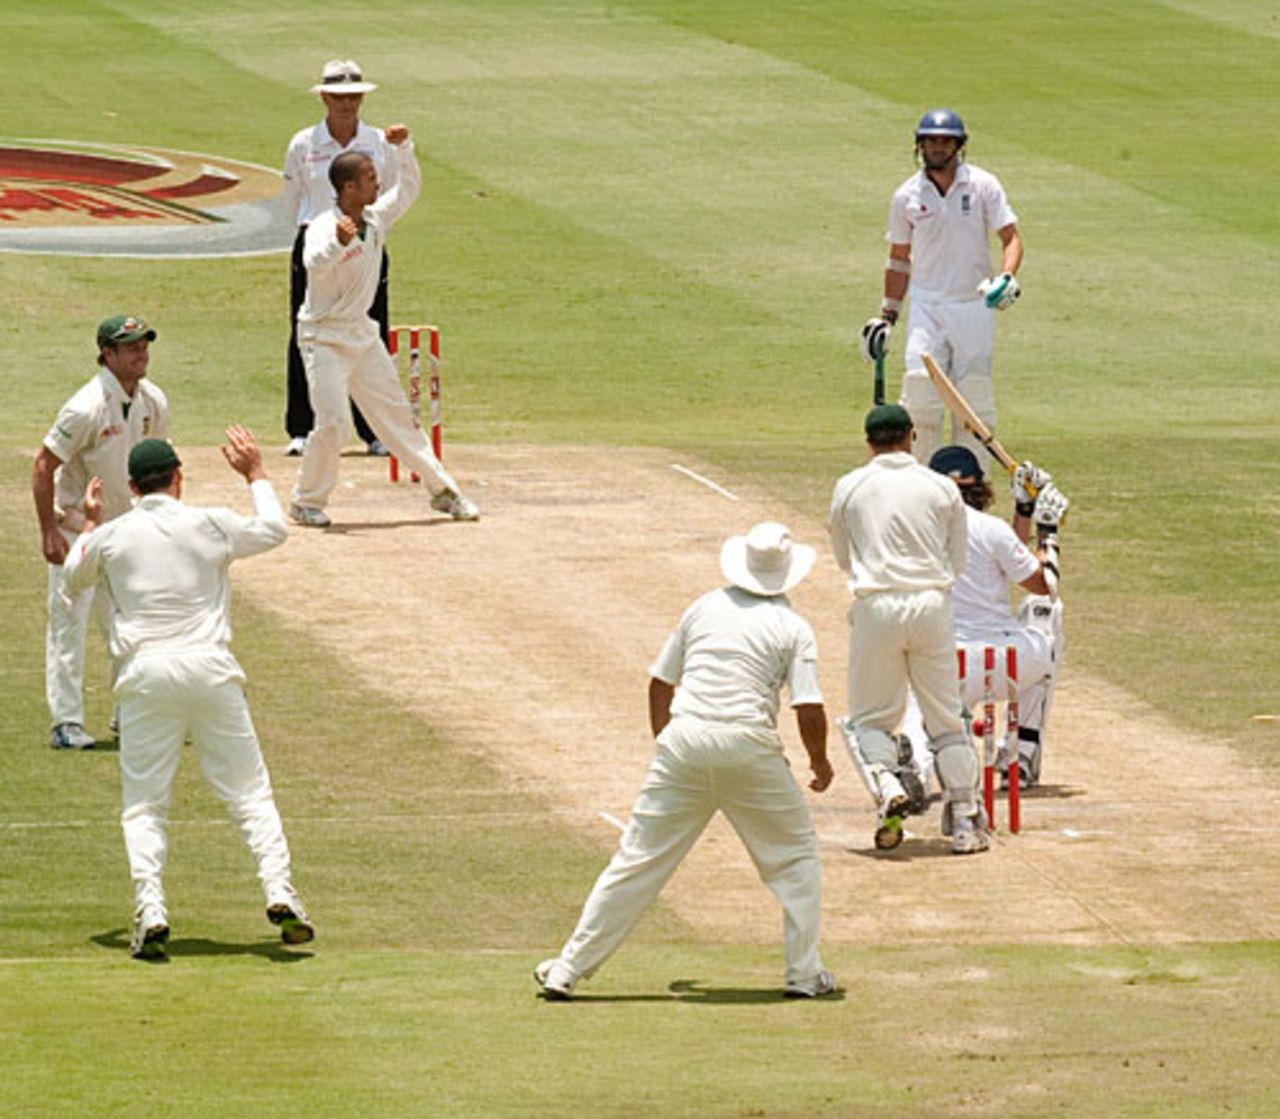 Ryan Sidebottom was the last man out, bowled by JP Duminy to cue South African celebrations, South Africa v England, Johannesburg, 17 January, 2010 
